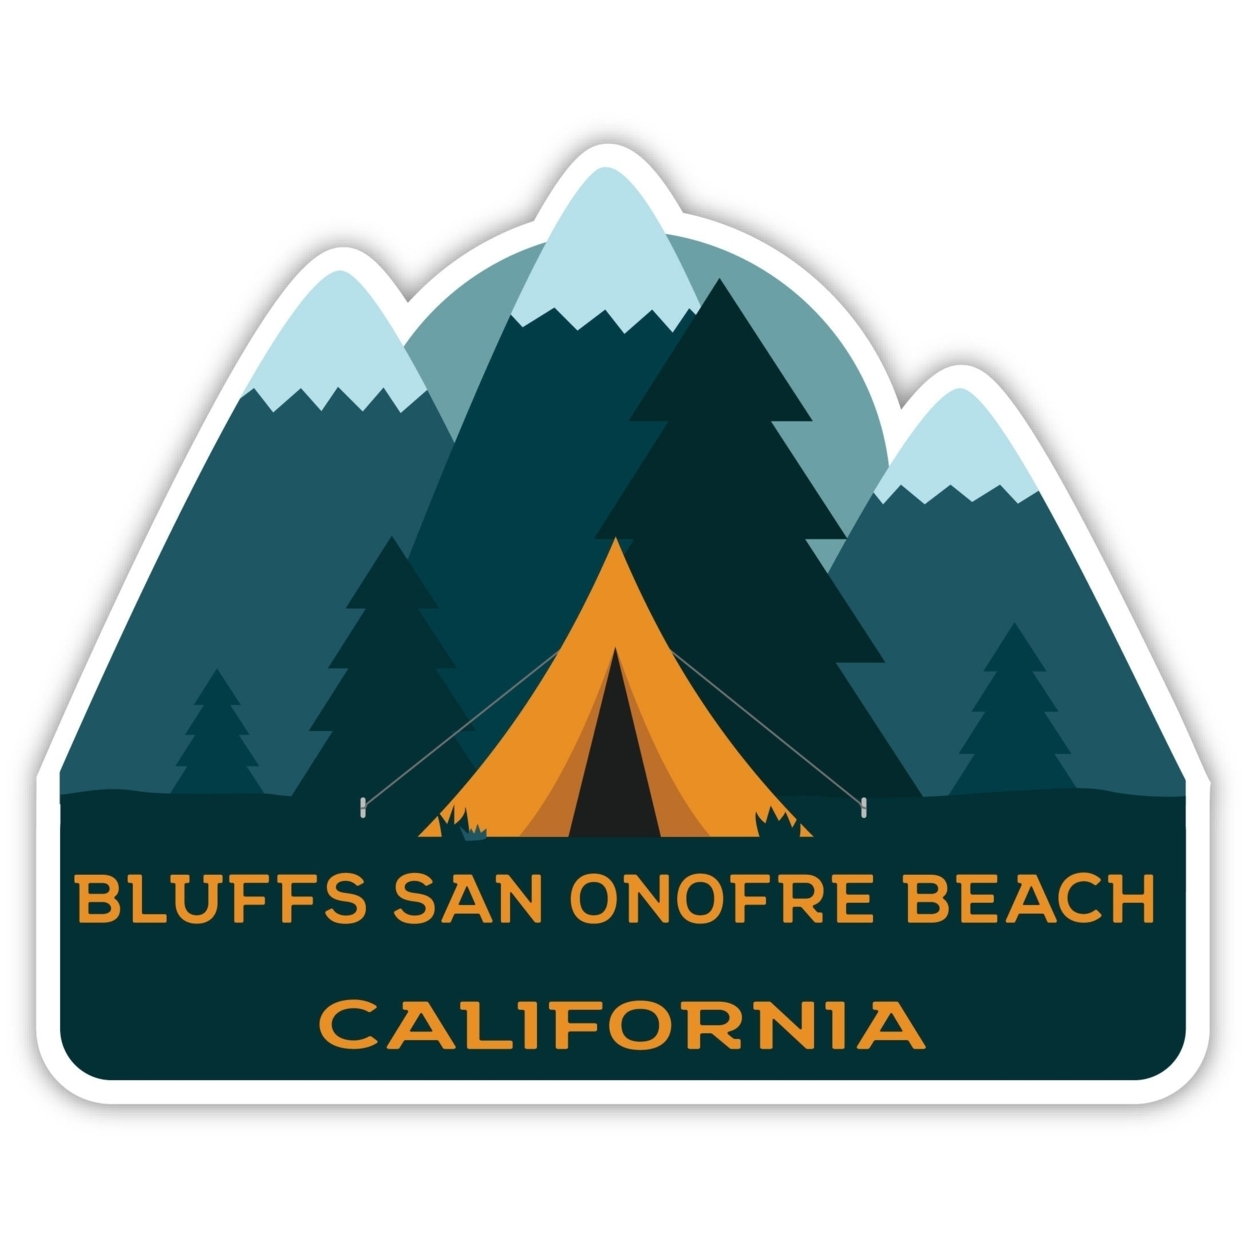 Bluffs San Onofre Beach California Souvenir Decorative Stickers (Choose Theme And Size) - 4-Pack, 10-Inch, Tent